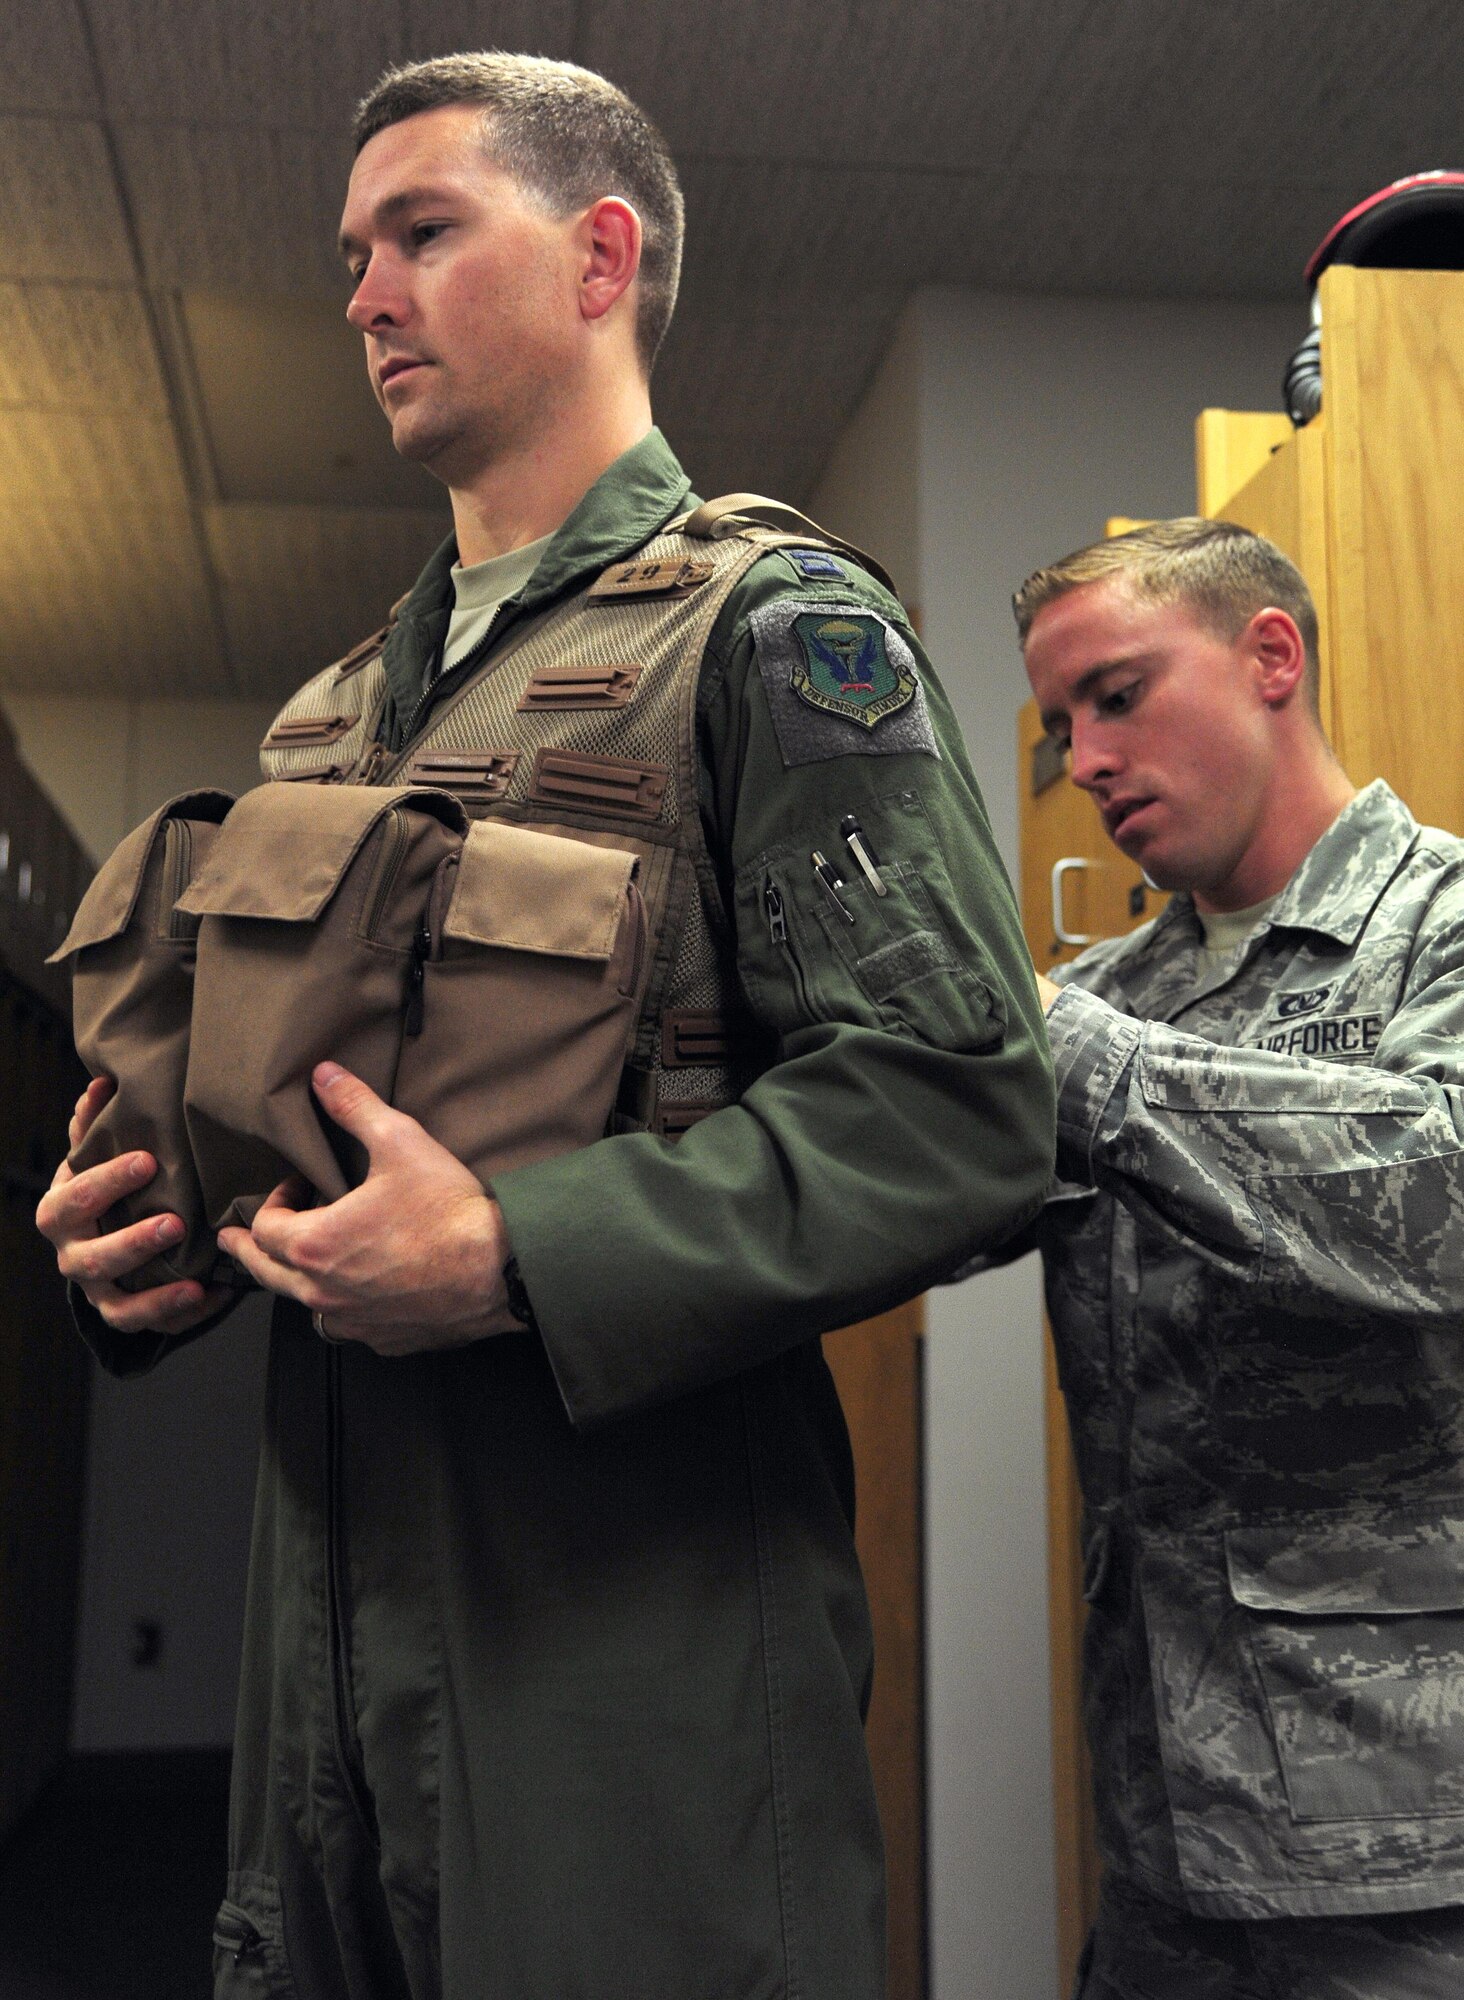 U.S. Air Force Senior Airman Adam Clapp, right, an aircrew flight equipment technician from the 509th Operations Support Squadron, adjusts the straps on an aircrew survival vest for Capt. Daniel Welch, a B-2 Spirit pilot from the 13th Bomb Squadron during Exercise Global Thunder 17 (GT17) at Whiteman Air Force Base, Mo., Oct. 25, 2016. GT17 is an annual command and control exercise designed to train U.S. Strategic Command forces and assess joint operational readiness. (U.S. Air Force photo by Senior Airman Joel Pfiester)